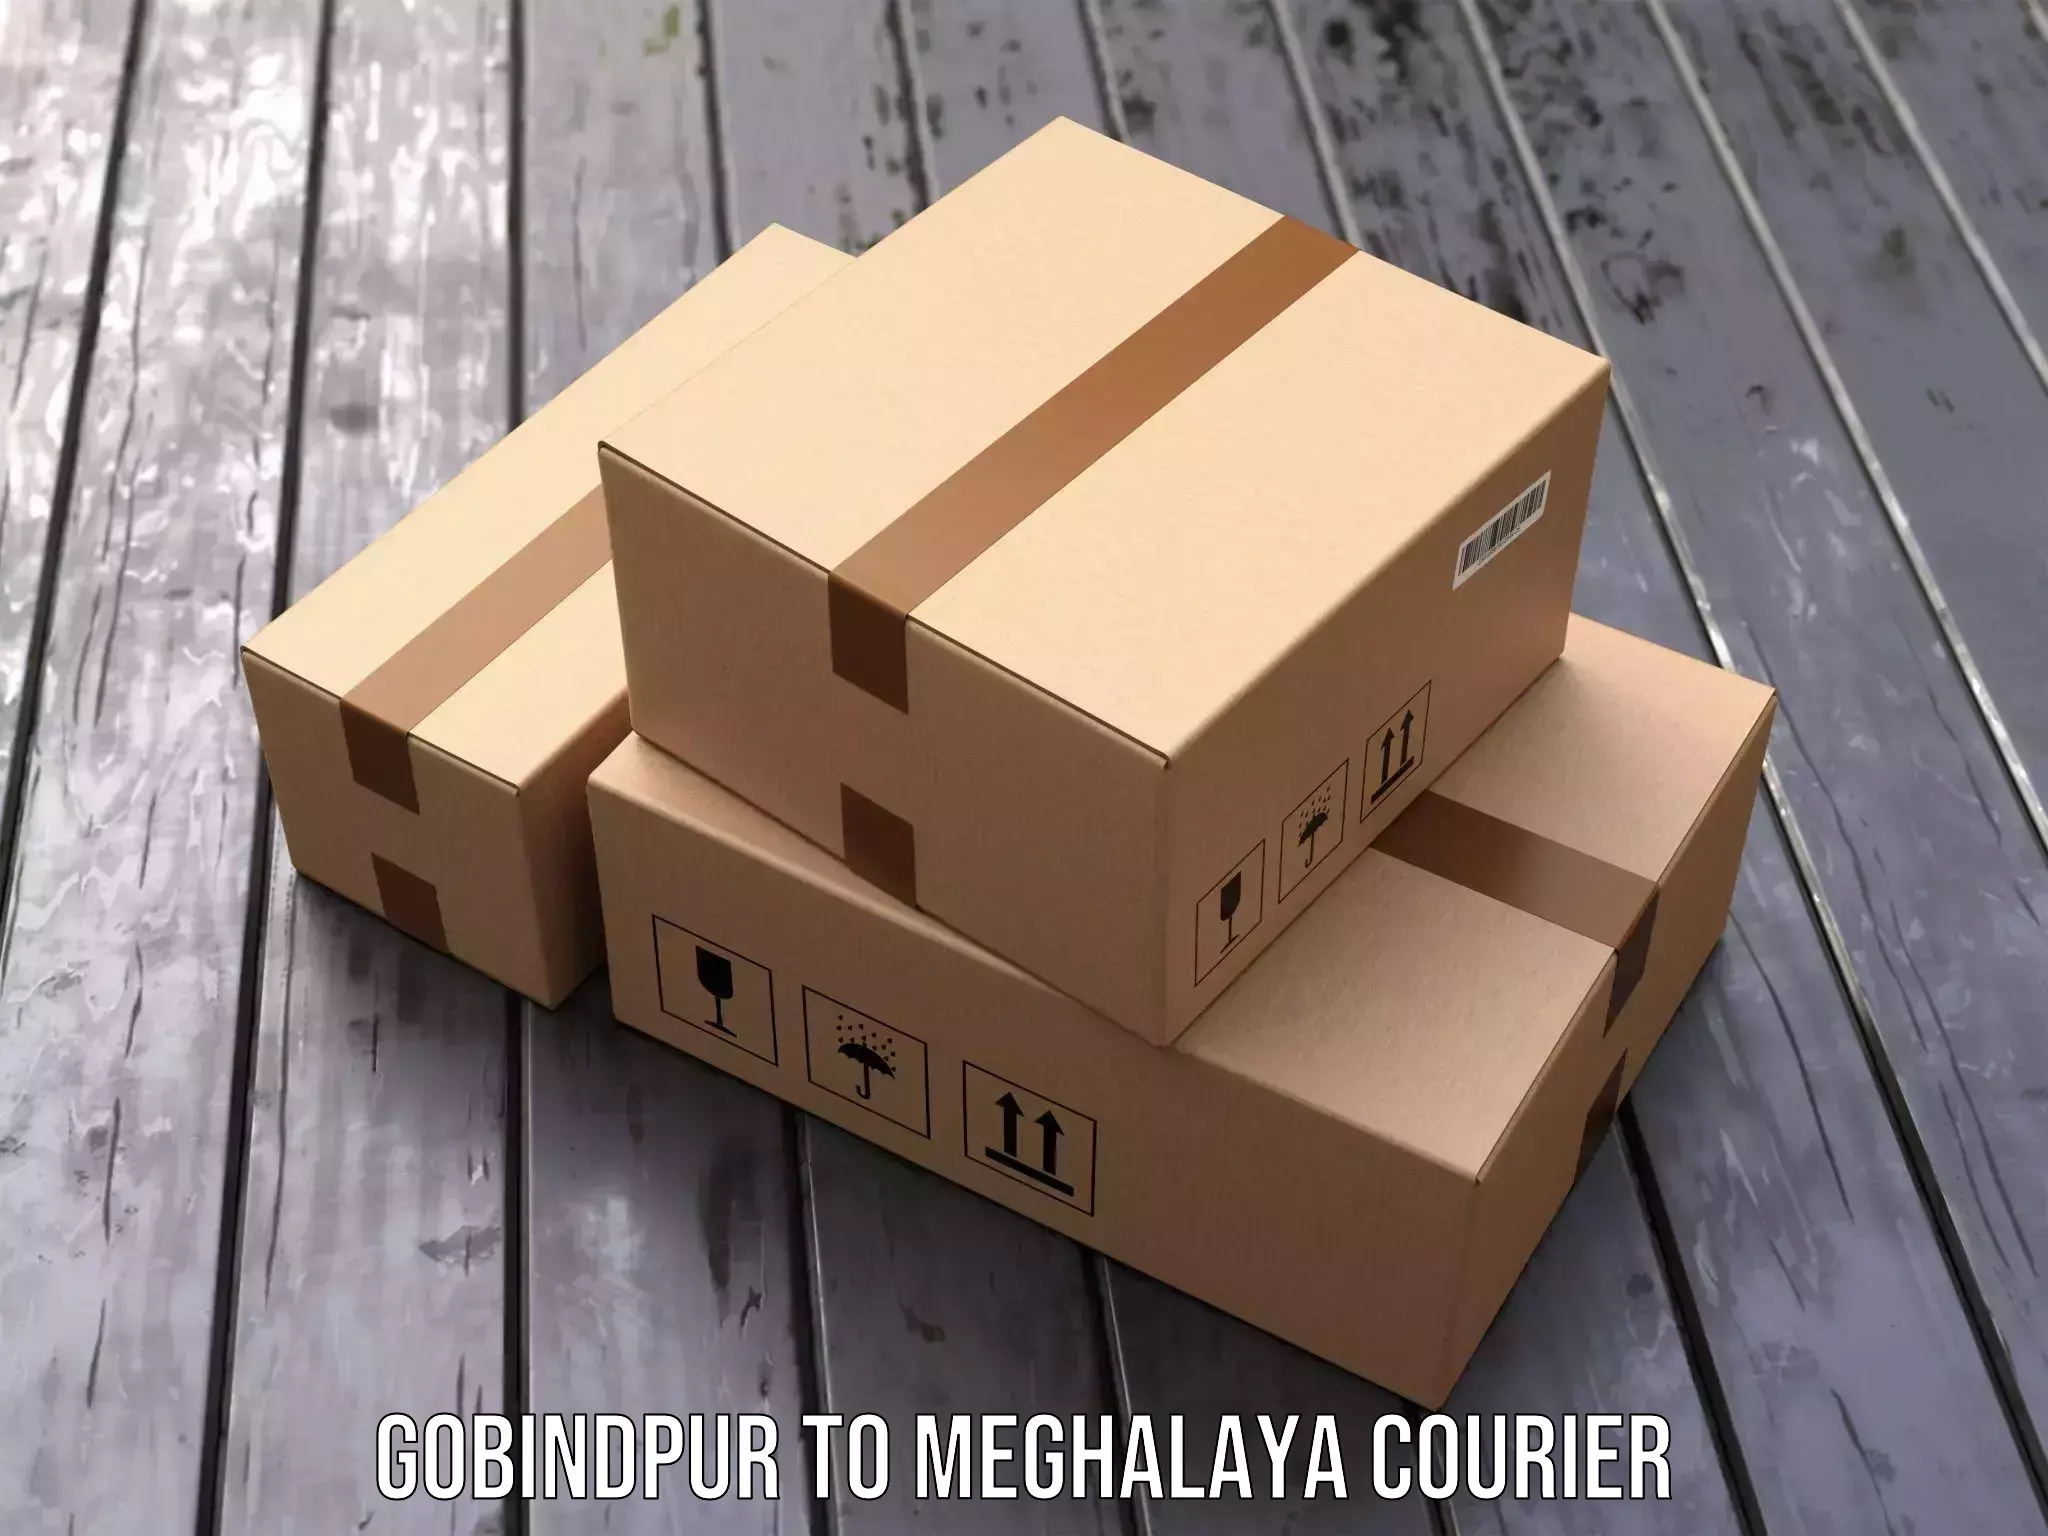 State-of-the-art courier technology Gobindpur to Meghalaya